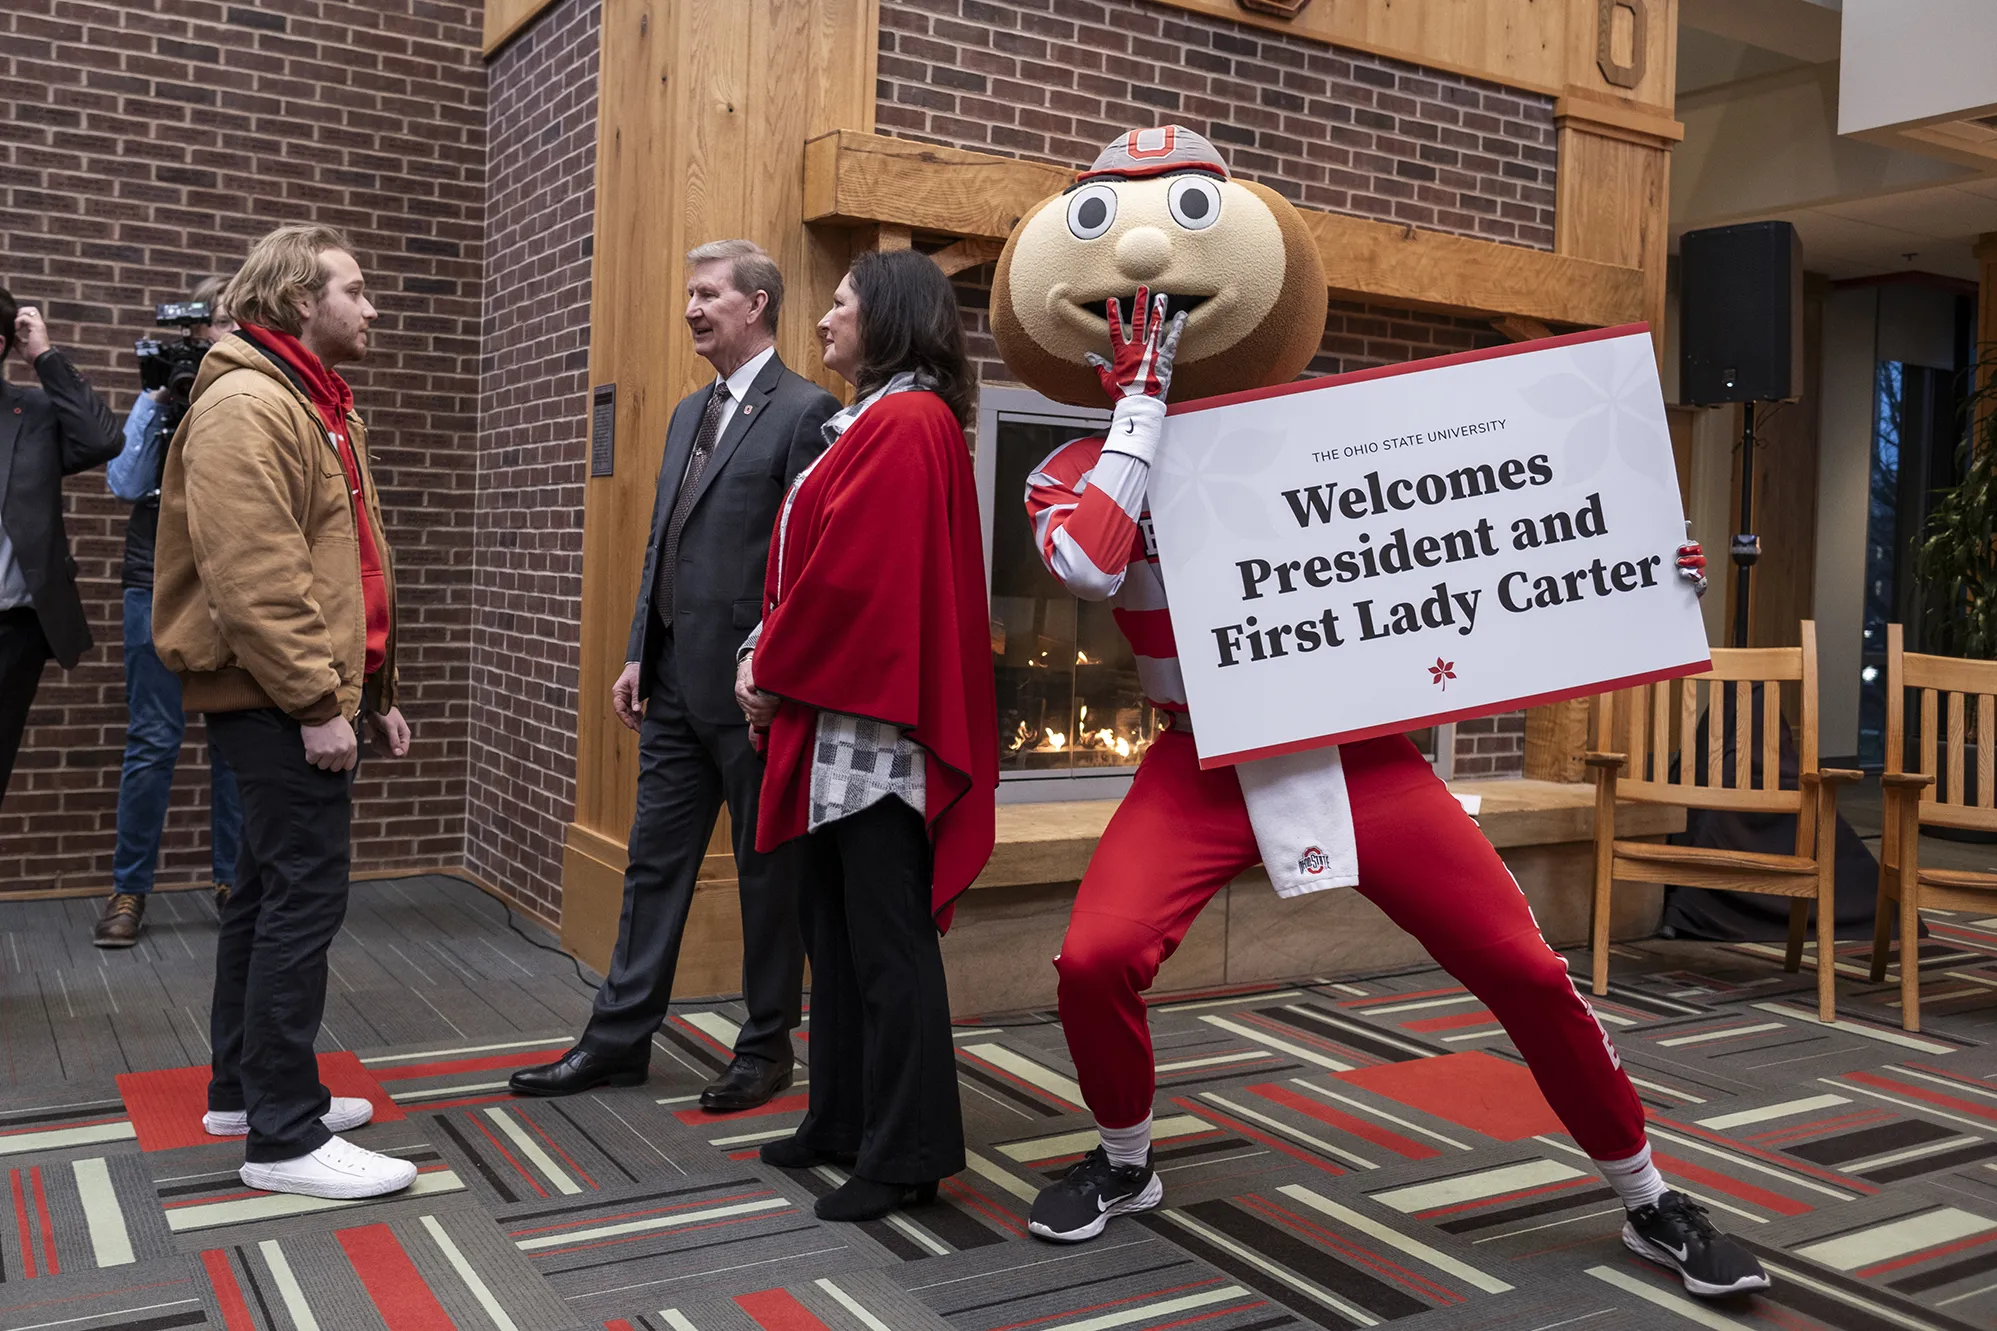 Brutus Buckeye holds a sign that says “Welcome President and First Lady Carter,” as the two speak with a student to Brutus’ right. Brutus is lunging sideways toward them, posing for the photo, and has his hand over his mouth as if laughing. (Brutus is a person wearing scarlet and gray and a giant buckeye as a head with a smiling face.) The Carters make eye contact with the student as they chat with him.